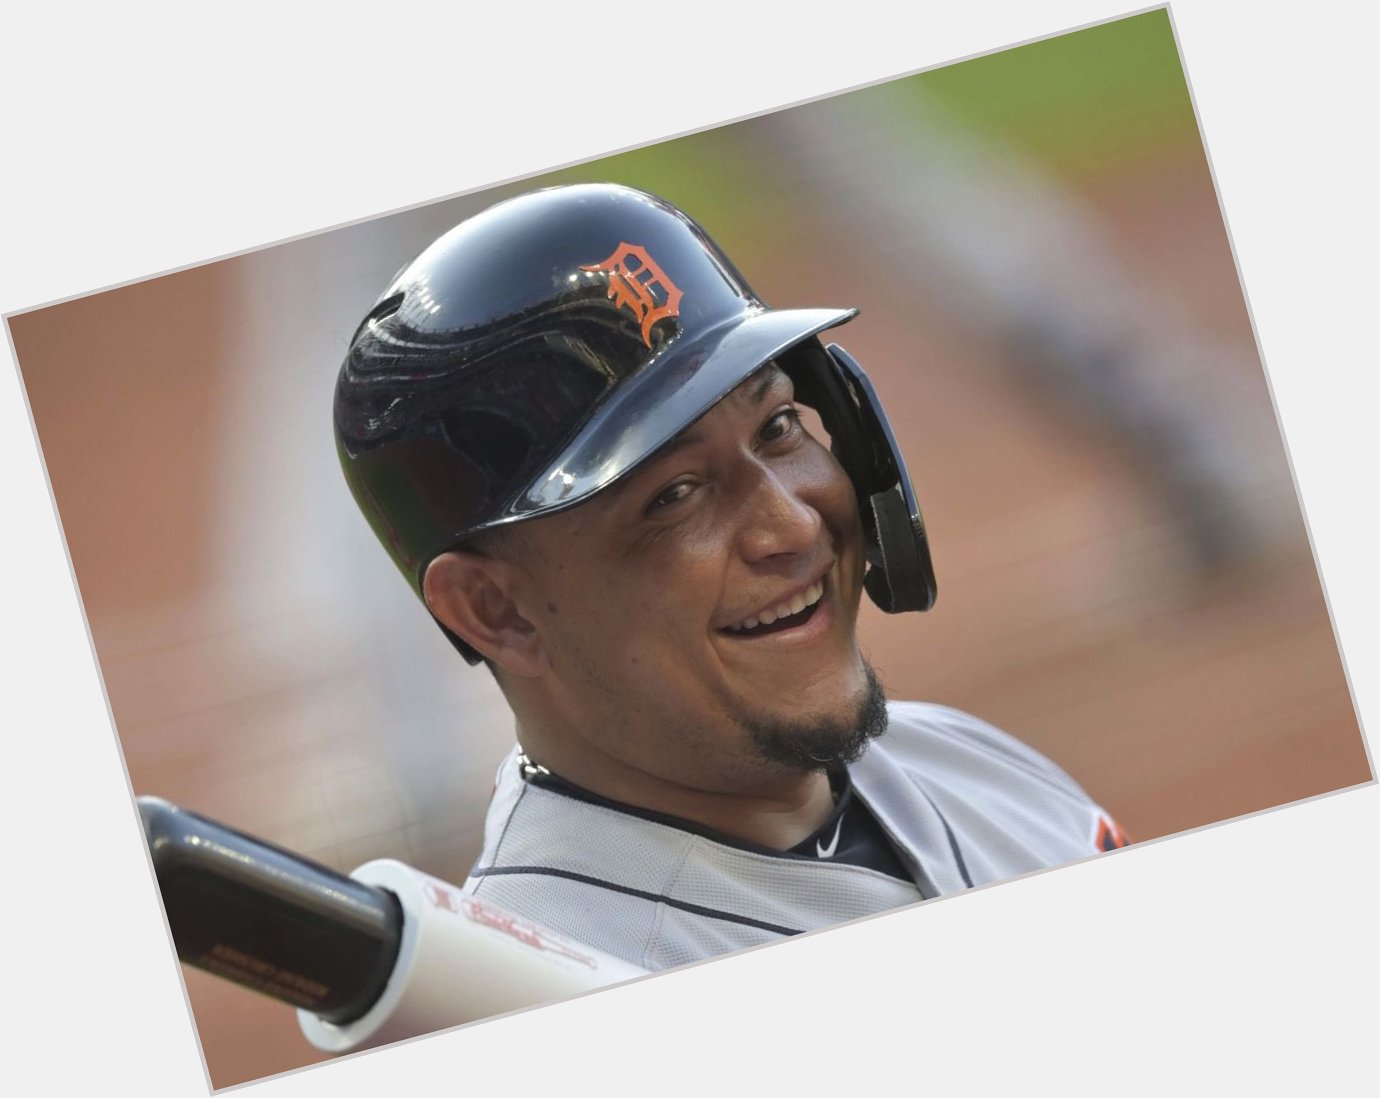 Happy Birthday to the always smiling, one of the greatest hitters of his generation, Miguel Cabrera! 